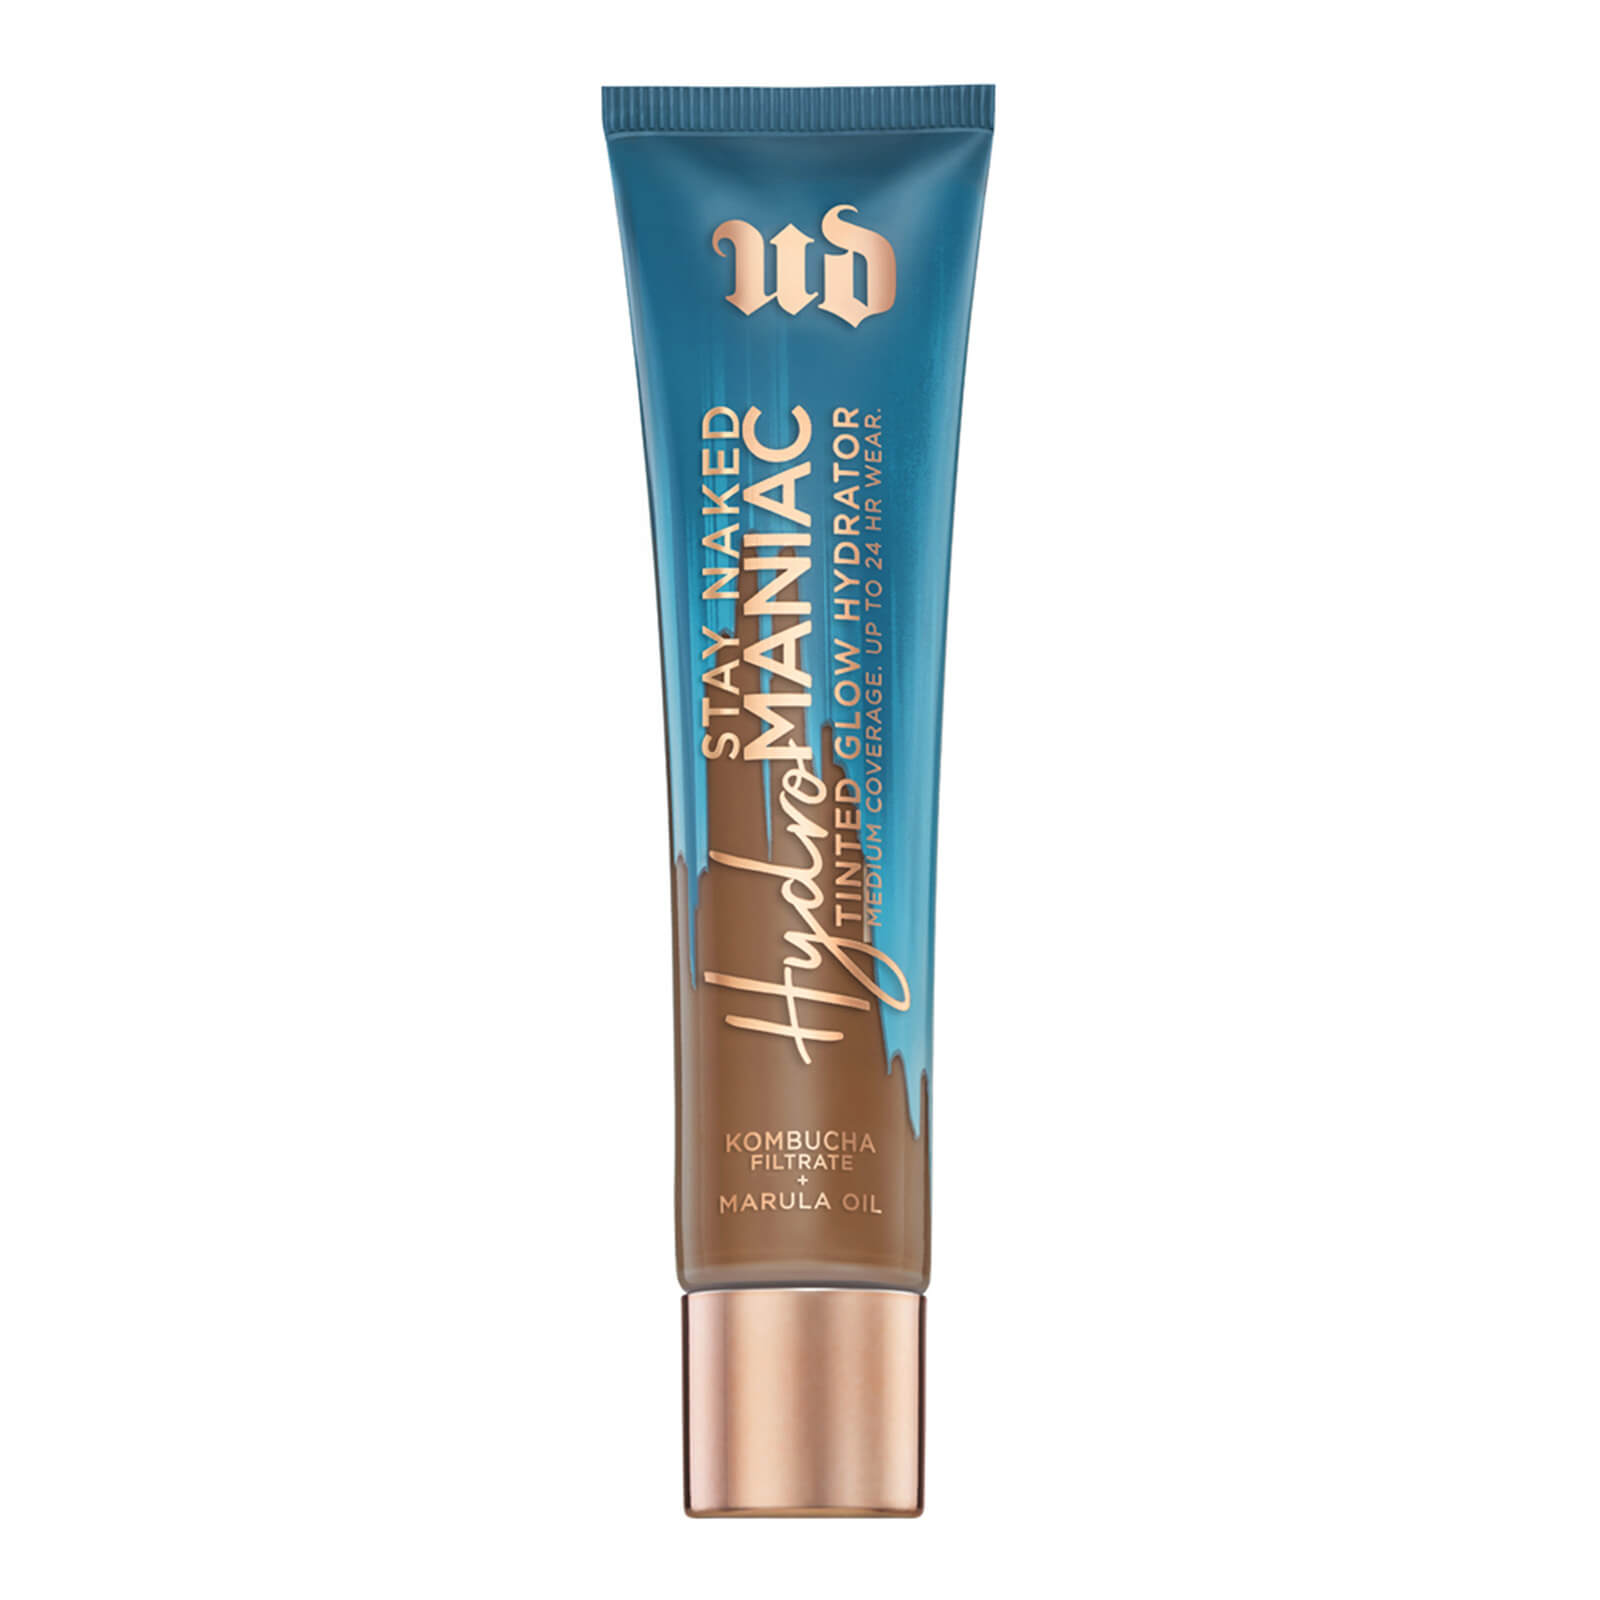 Urban Decay Stay Naked Hydromaniac Tinted Glow Hydrator 35ml (Various Shades) - 70